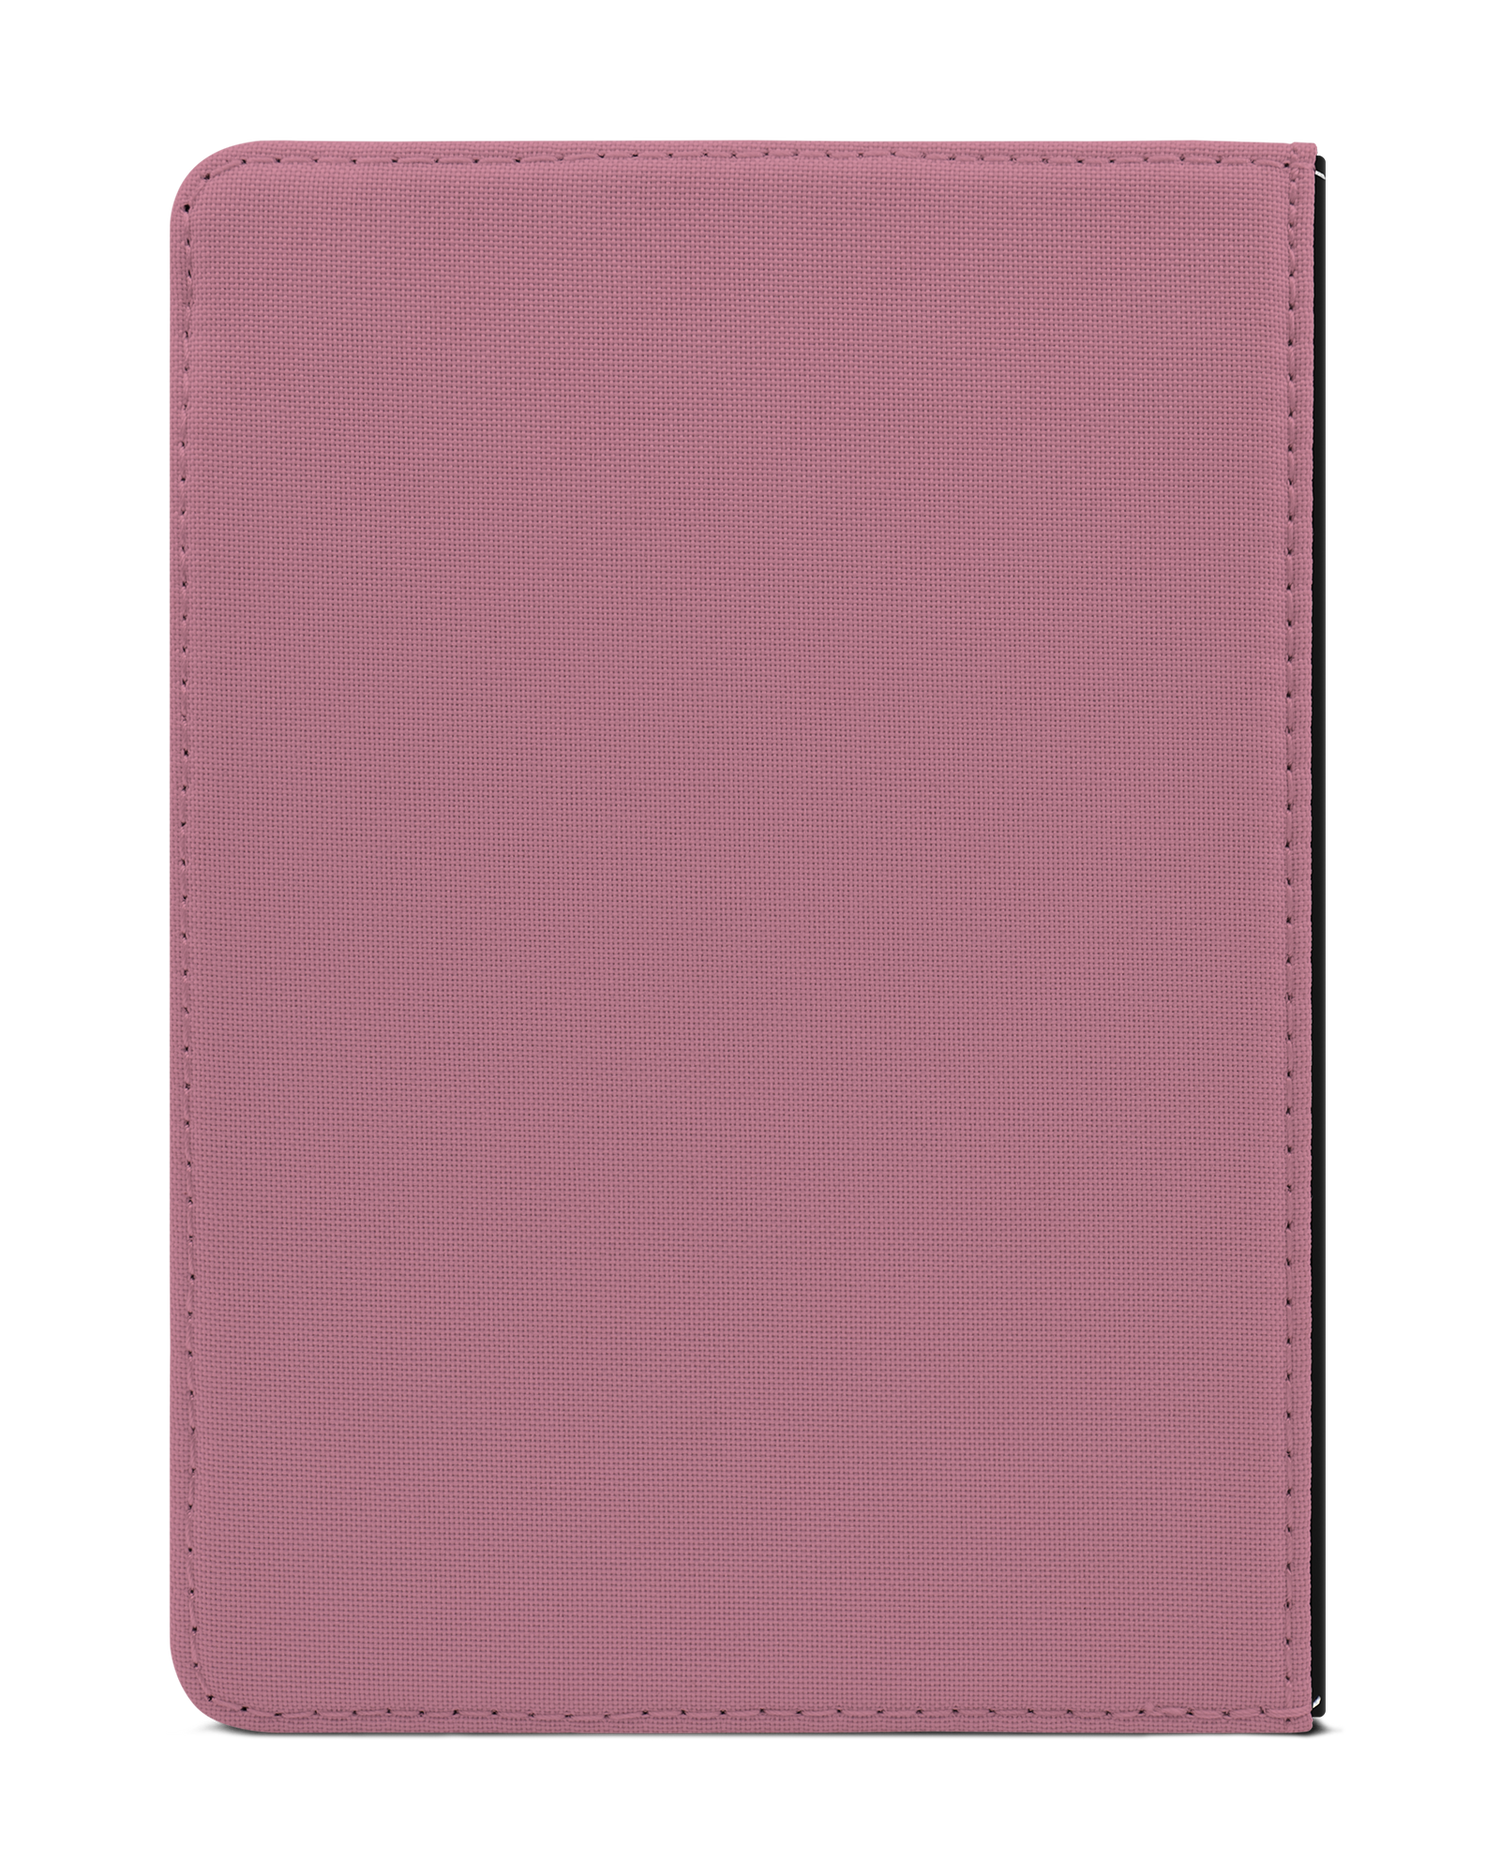 WILD ROSE eReader Case for tolino vision 1 to 4 HD: Back View